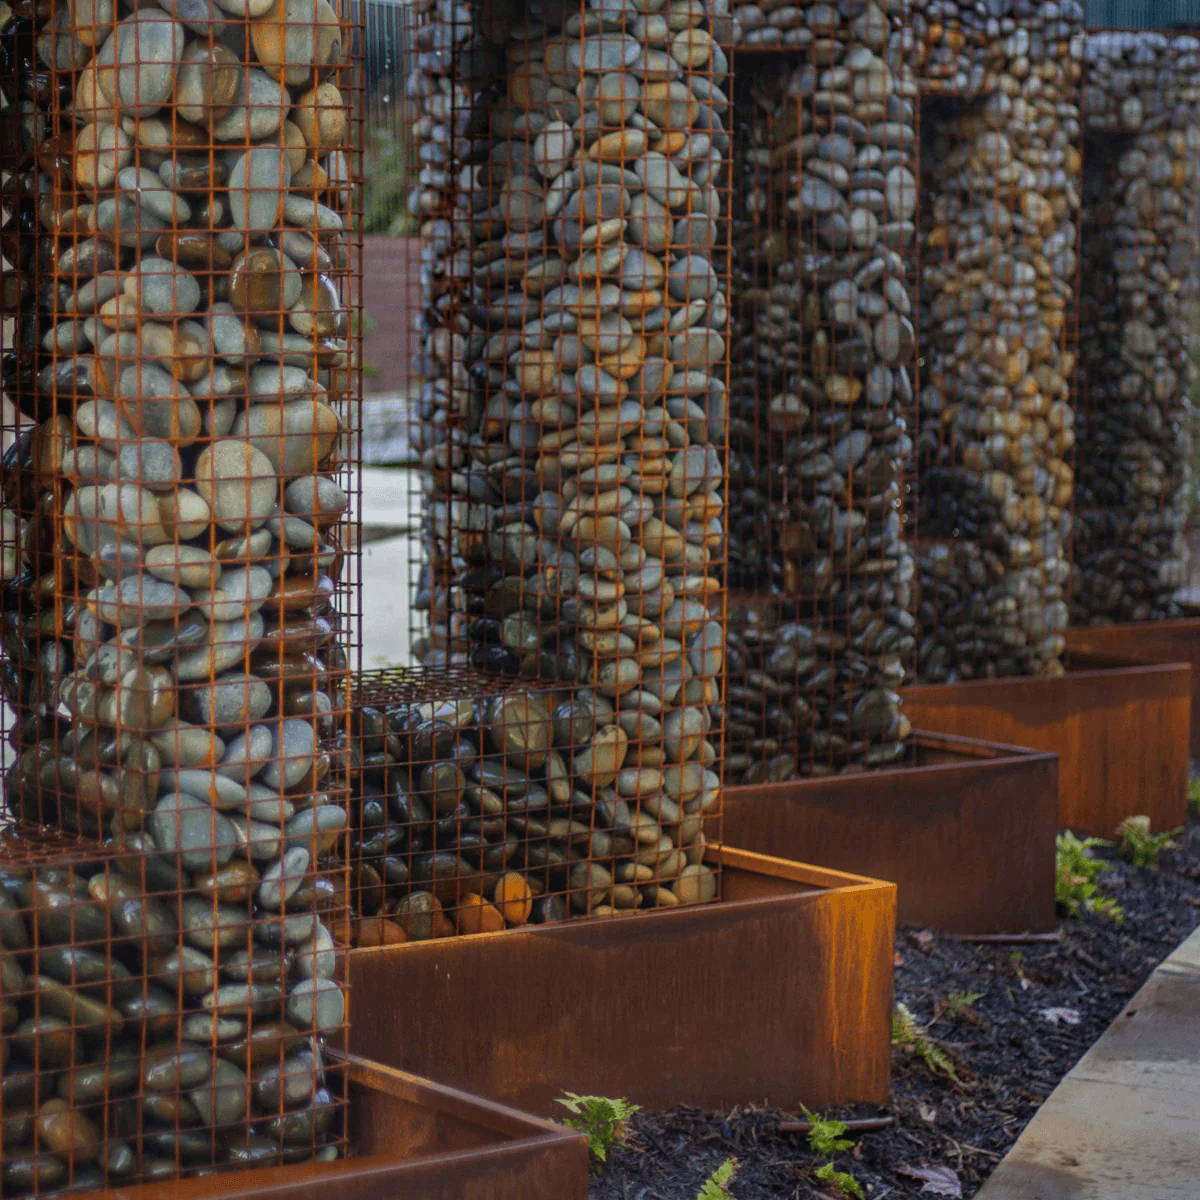 A fountain inspired by a the Gabion method of soil retention.